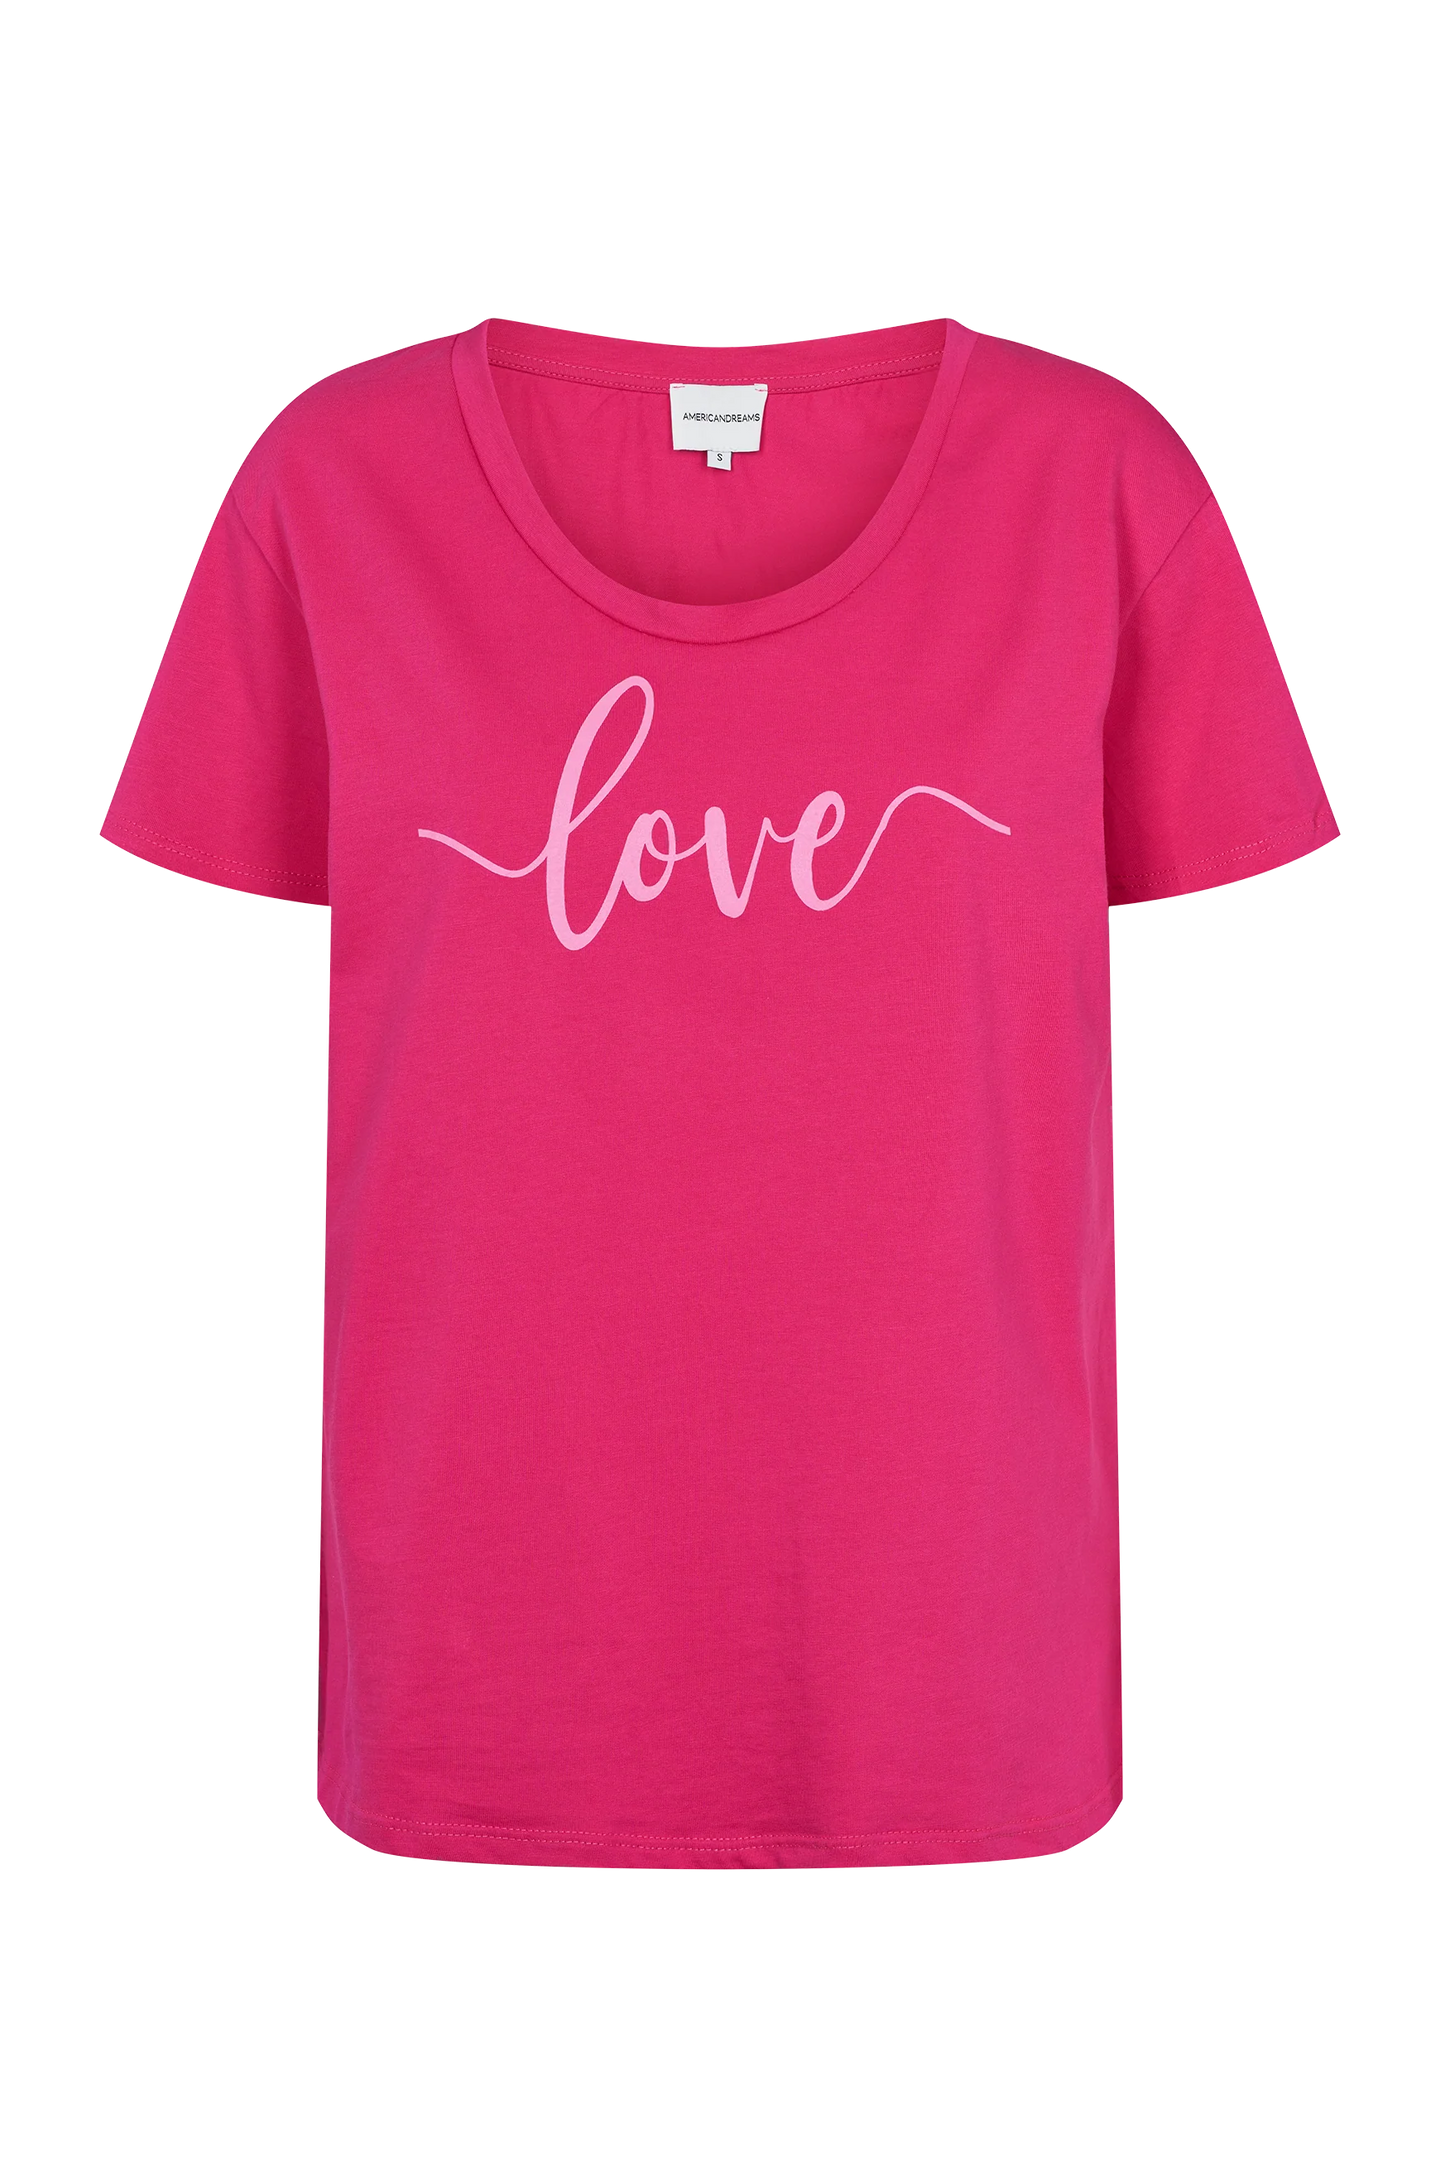 T-shirt Pink Love Cotton Tee W/Light Pink Letters